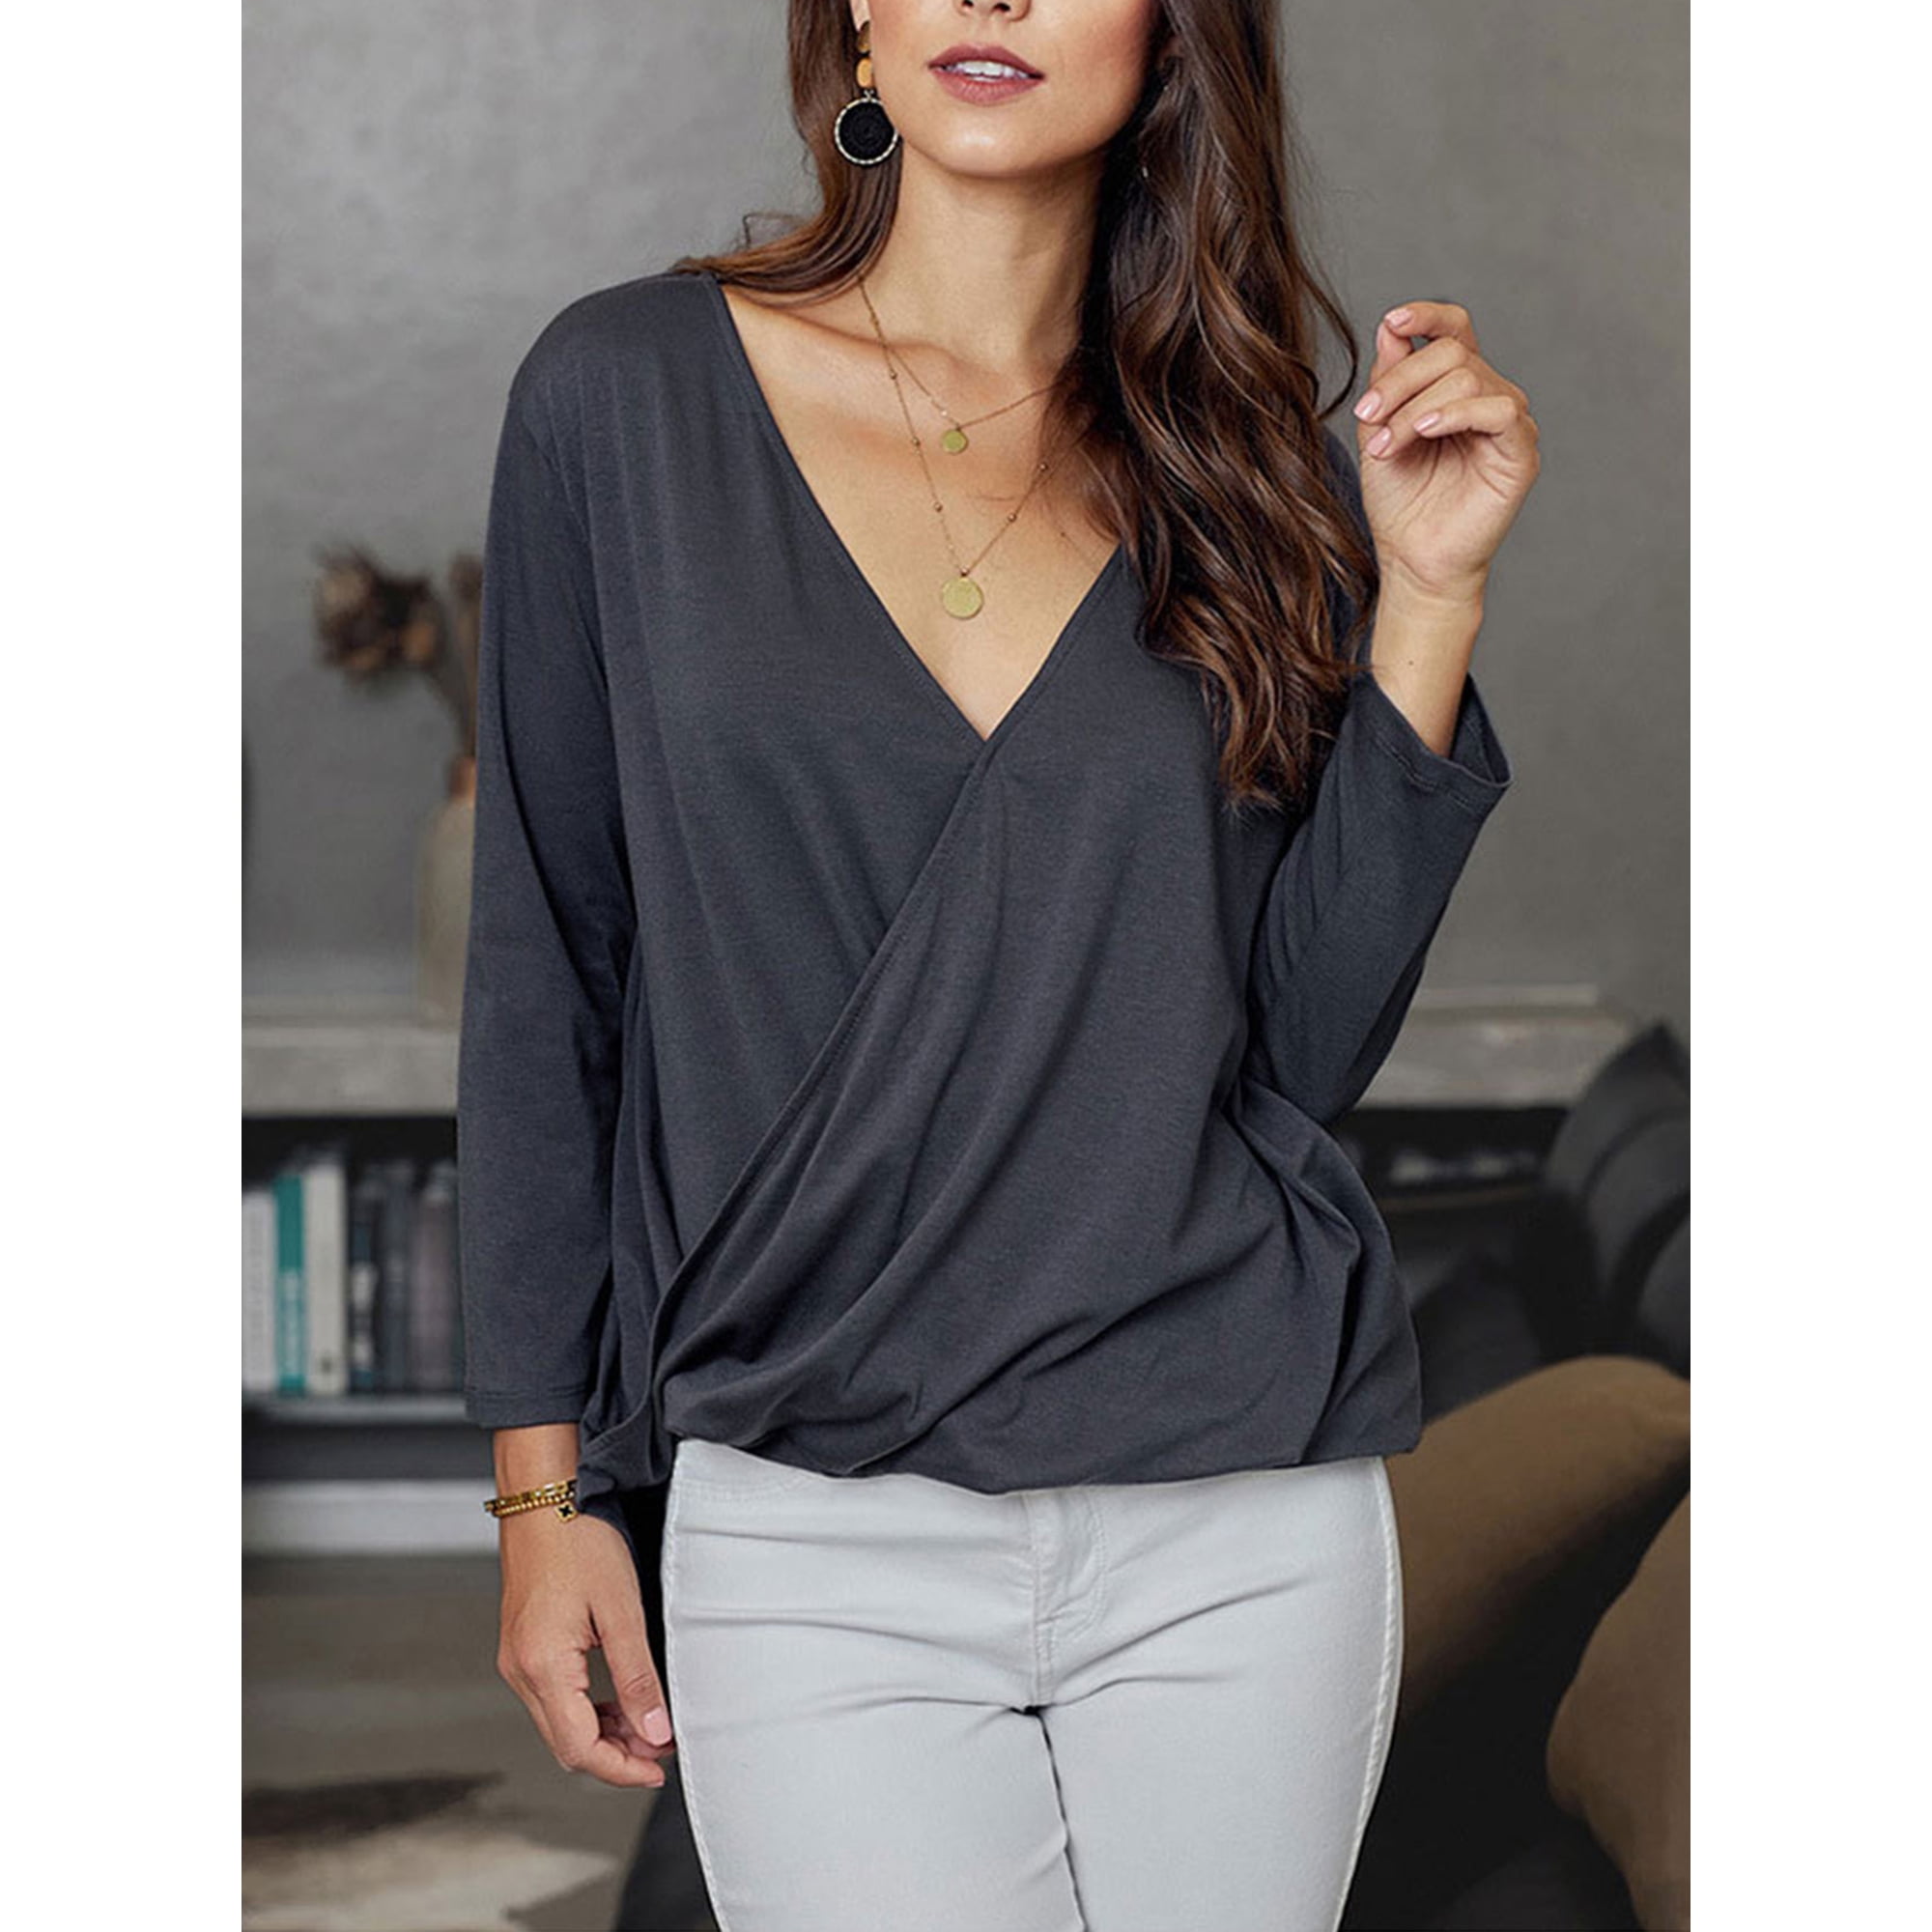 Abeaicoc Womens V-Neck Batwing Sleeve Casual Pure Color T-Shirt Tops Blouse 